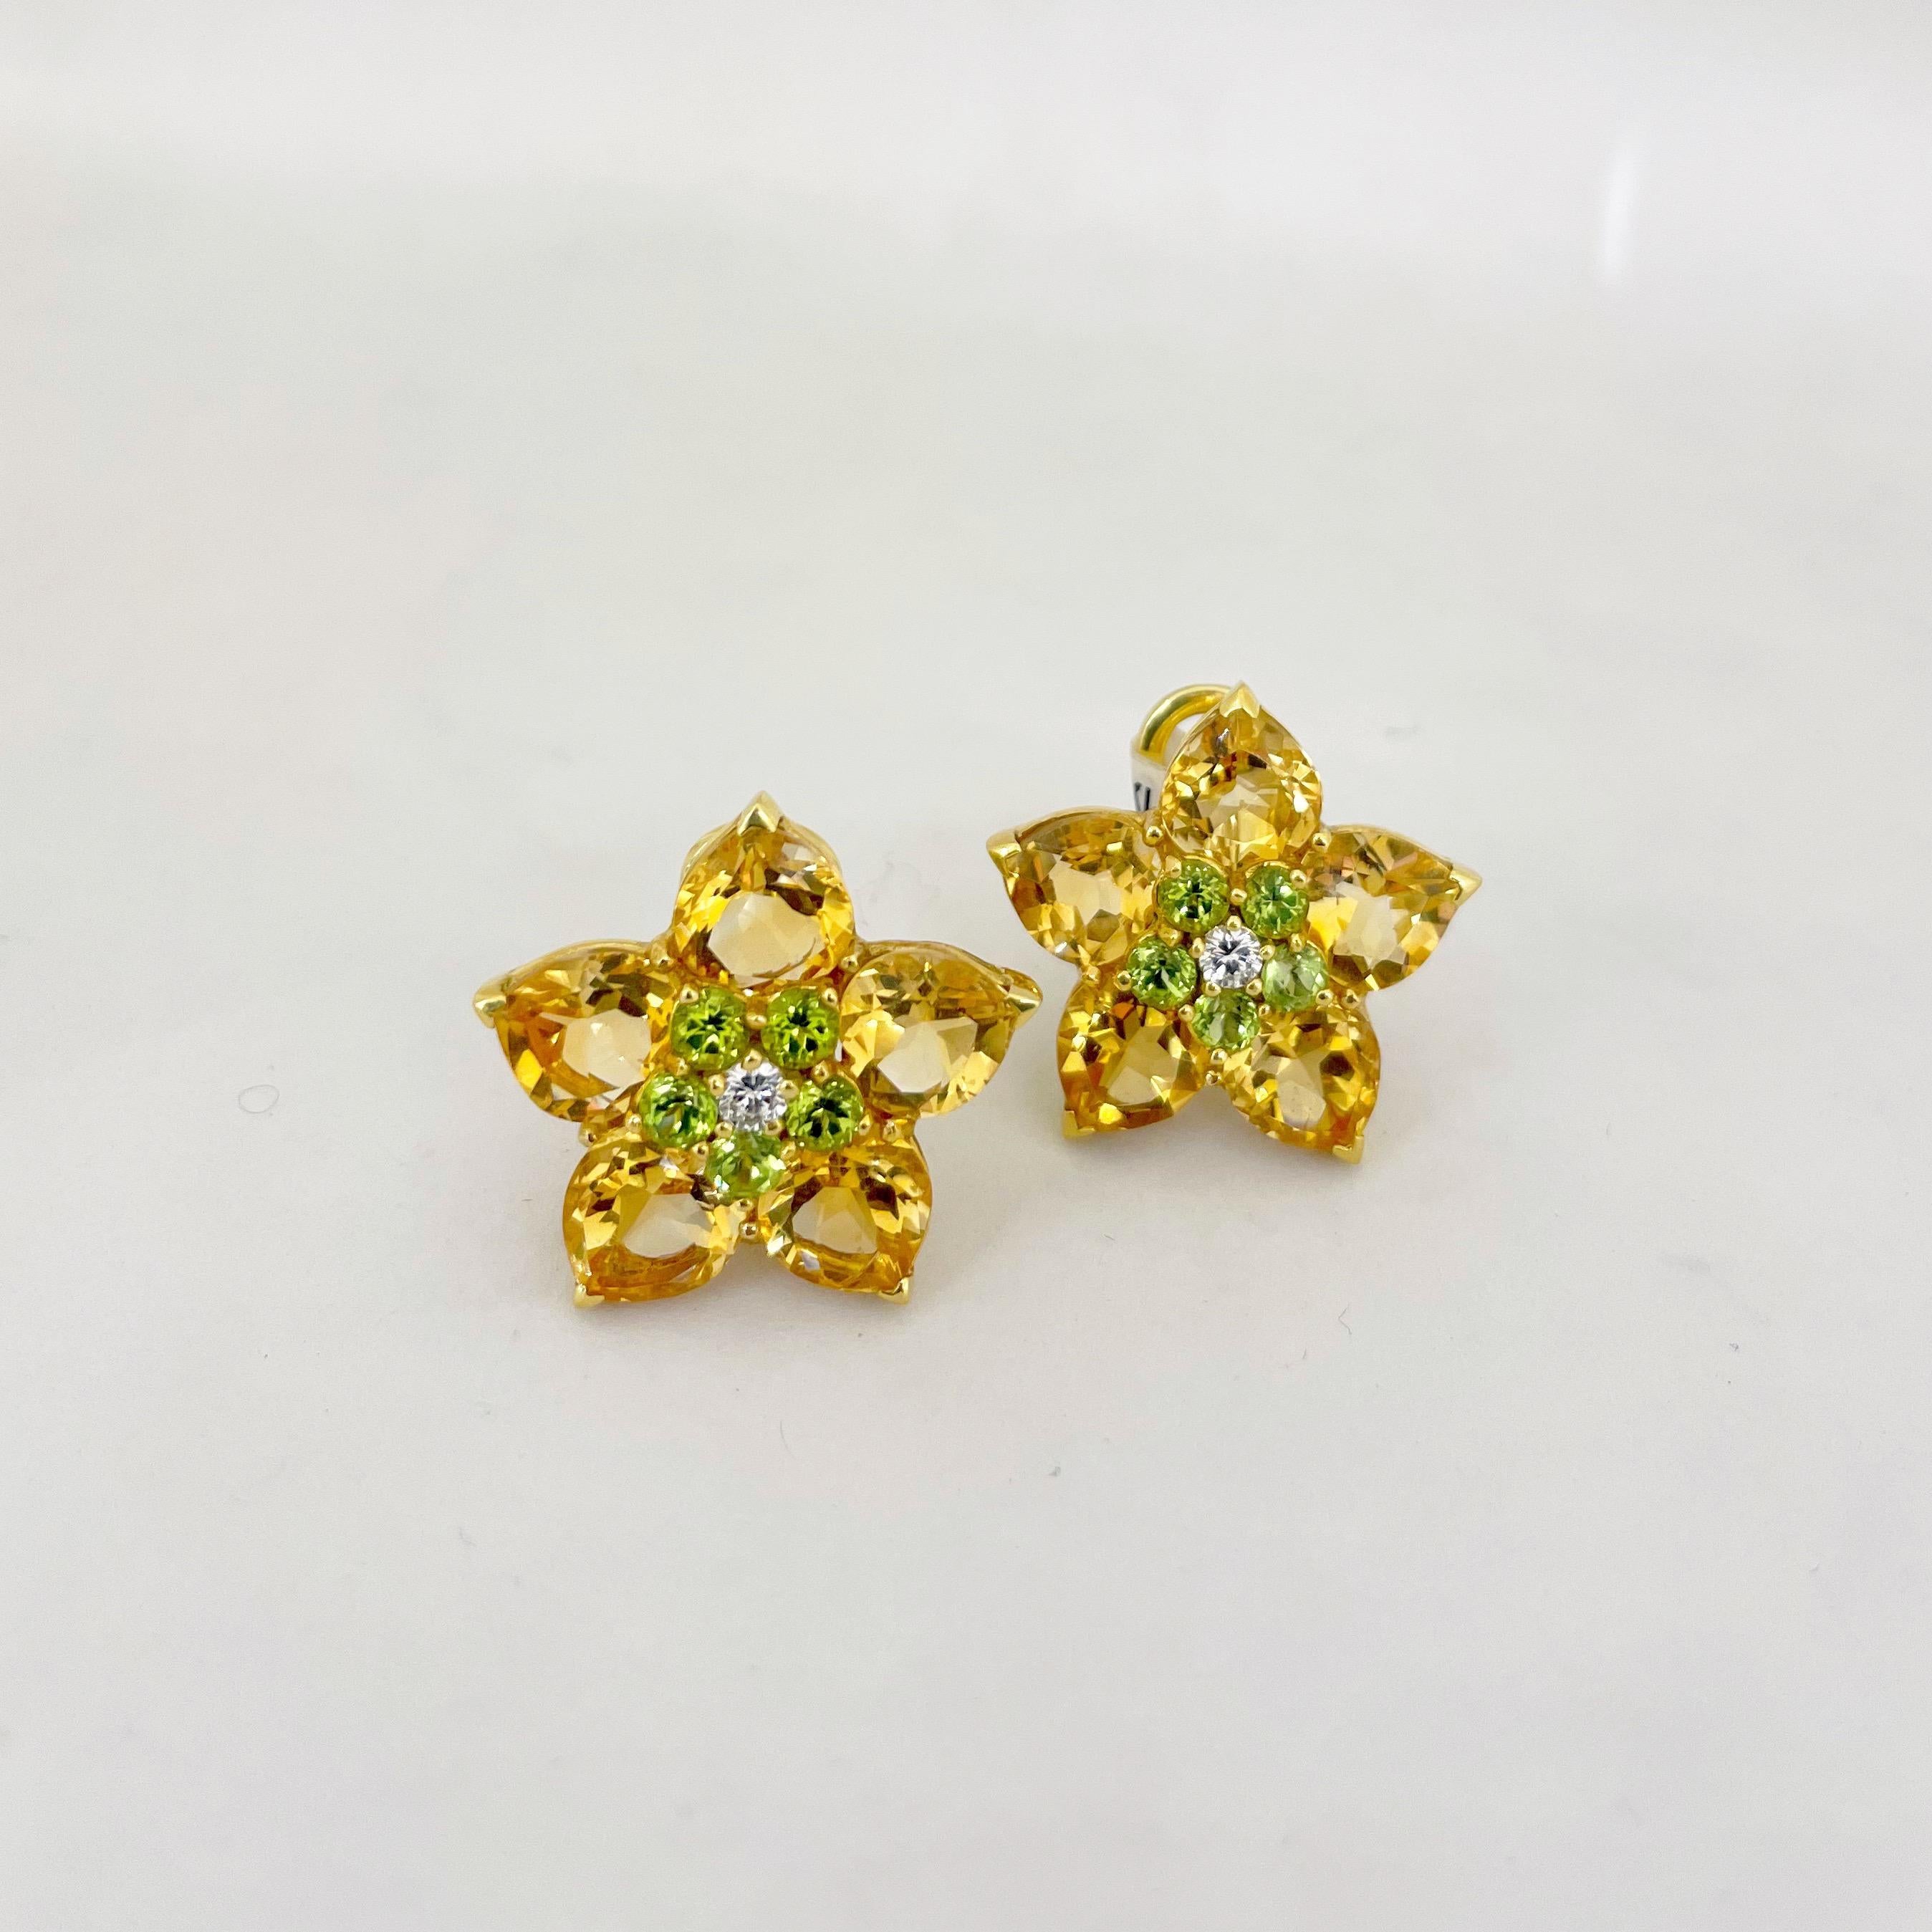 Designed by Barzizza of Valenza, Italy, for Cellini NYC, founded in 1958 the firm produces very limited series of unique jewelry pieces.
These flower earrings are artistically designed with pear shaped citrine petals and round brilliant peridots.